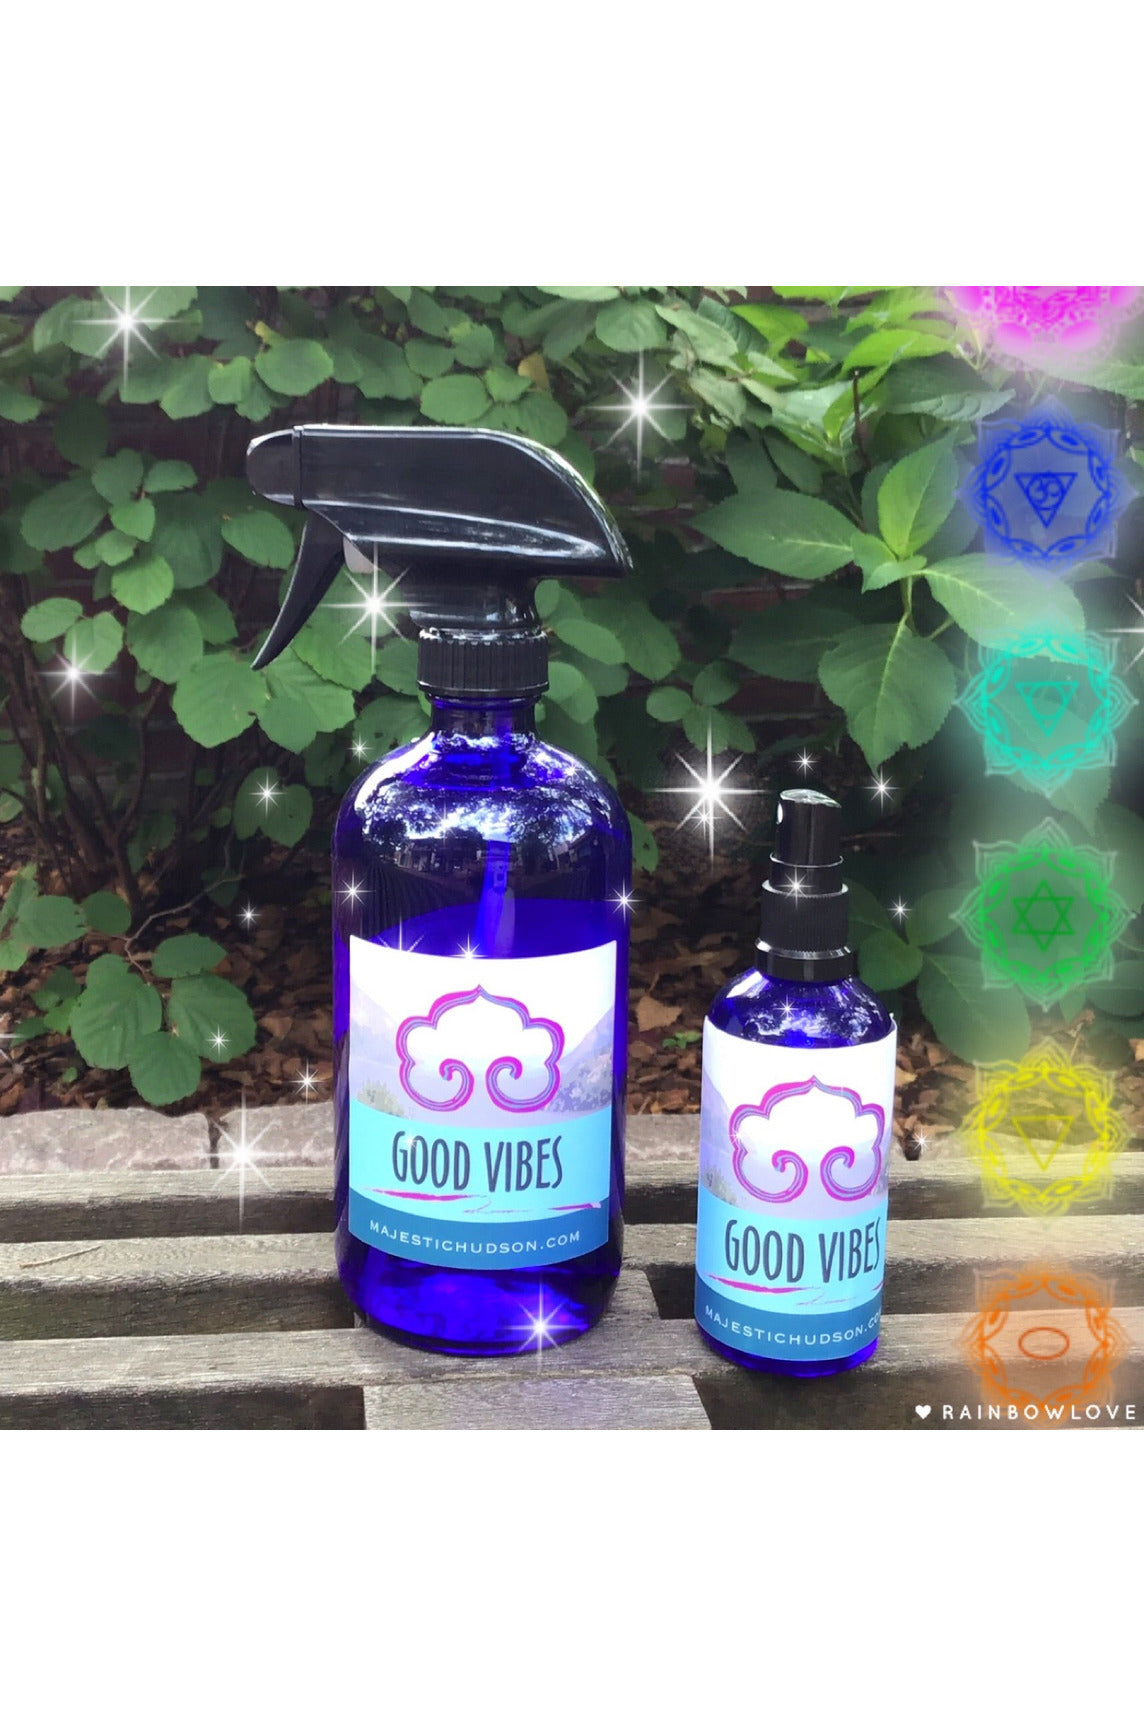 Good Vibes | Specialty Essence Majestic Hudson Lifestyle Experiences Aromatherapy